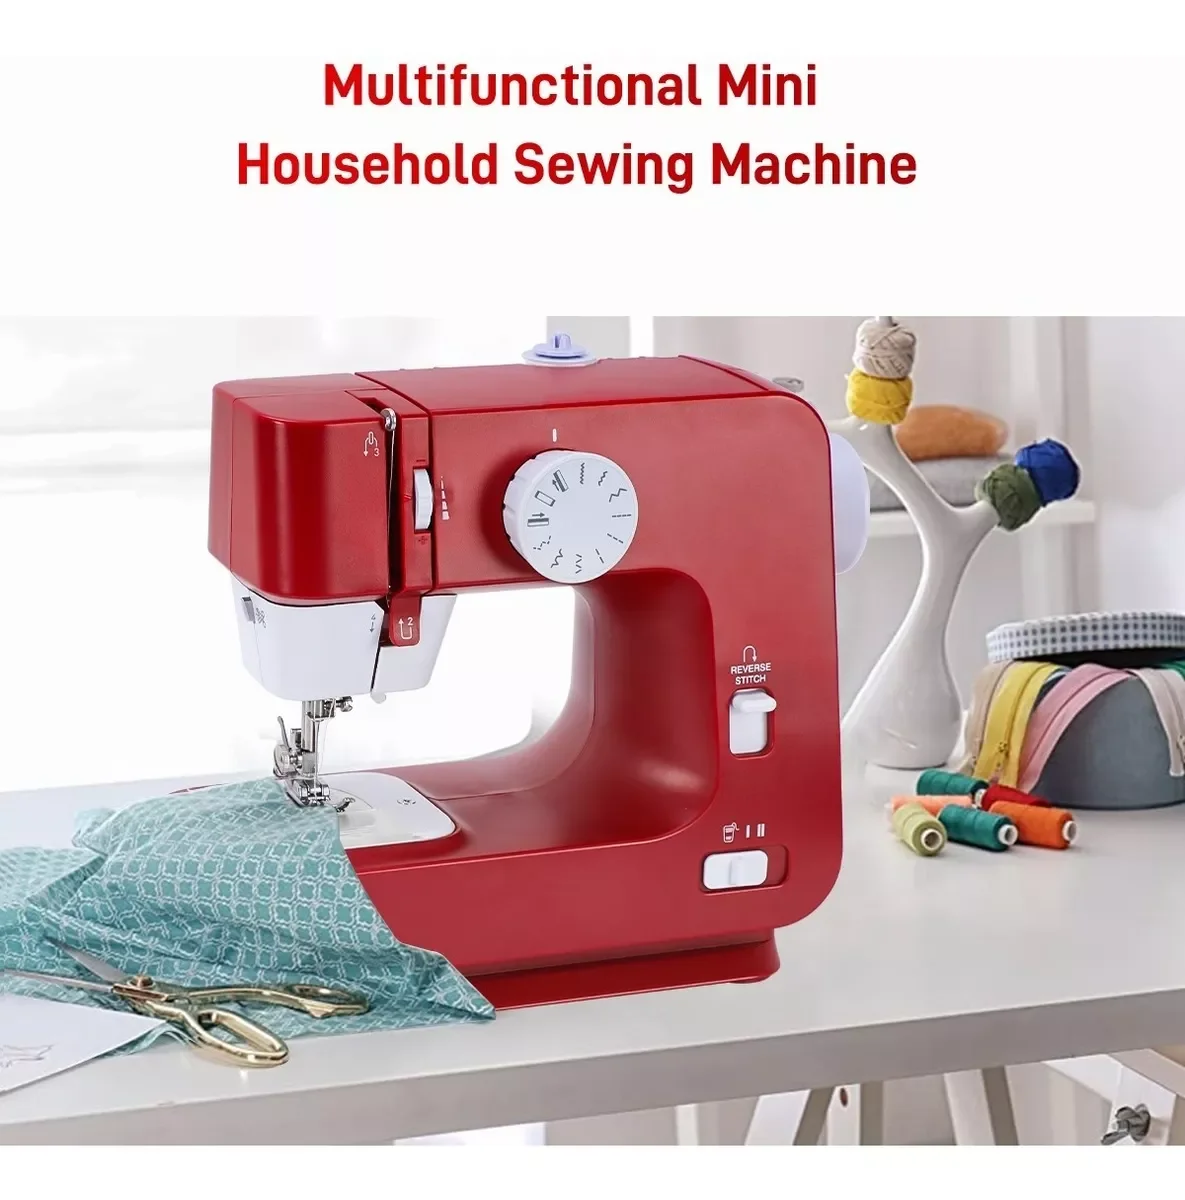 Portable Sewing Machine 12 Built-in Stitches Mini Sewing Machine for  Beginner with Reverse Sewing 3 Replaceable Feet Extension - AliExpress